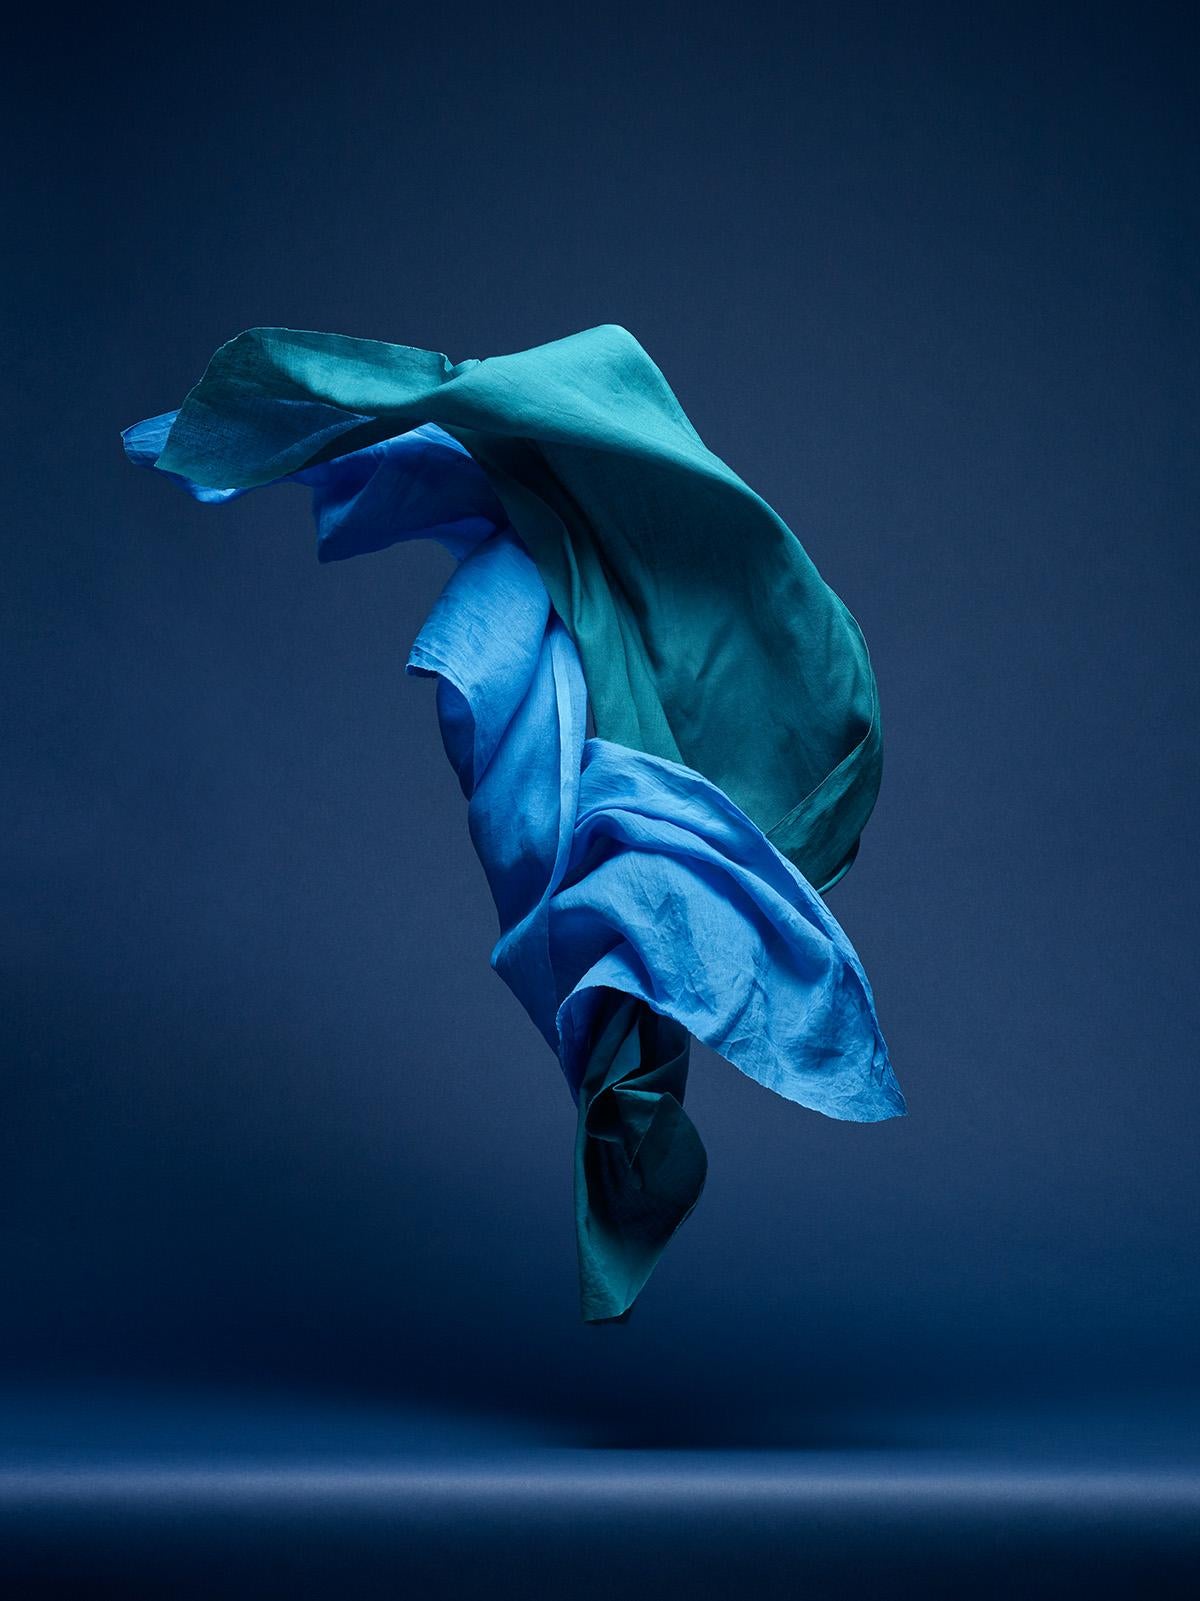 Neal Grundy Color Photograph - Dancing Fabric, Light Blue and Green 2